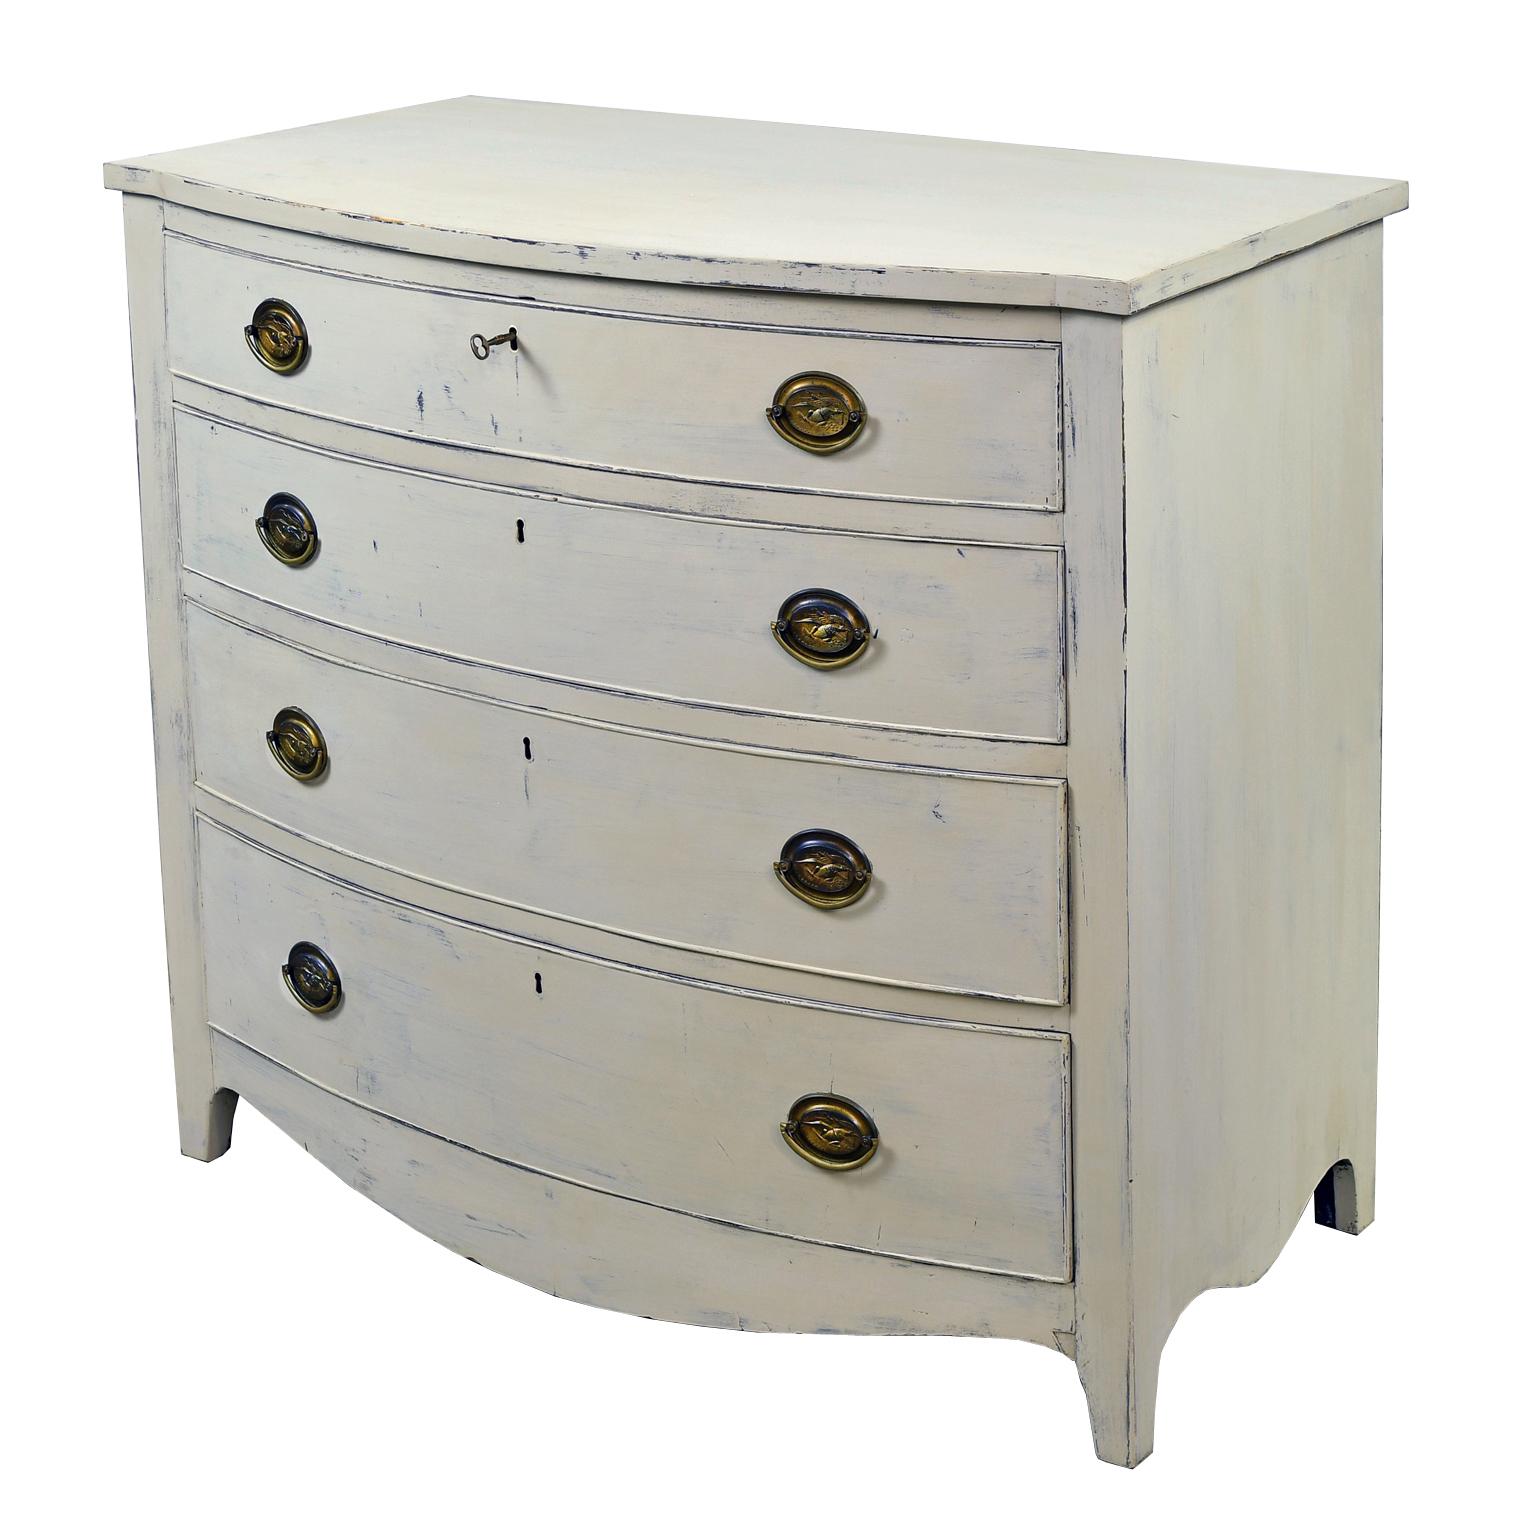 A lovely American Hepplewhite chest with bowed front, sculpted apron and tapered square feet offering four drawers of staggered depths with period brass plates and pulls. The oval escutcheon plates are embossed with a flying bald eagle clutching in